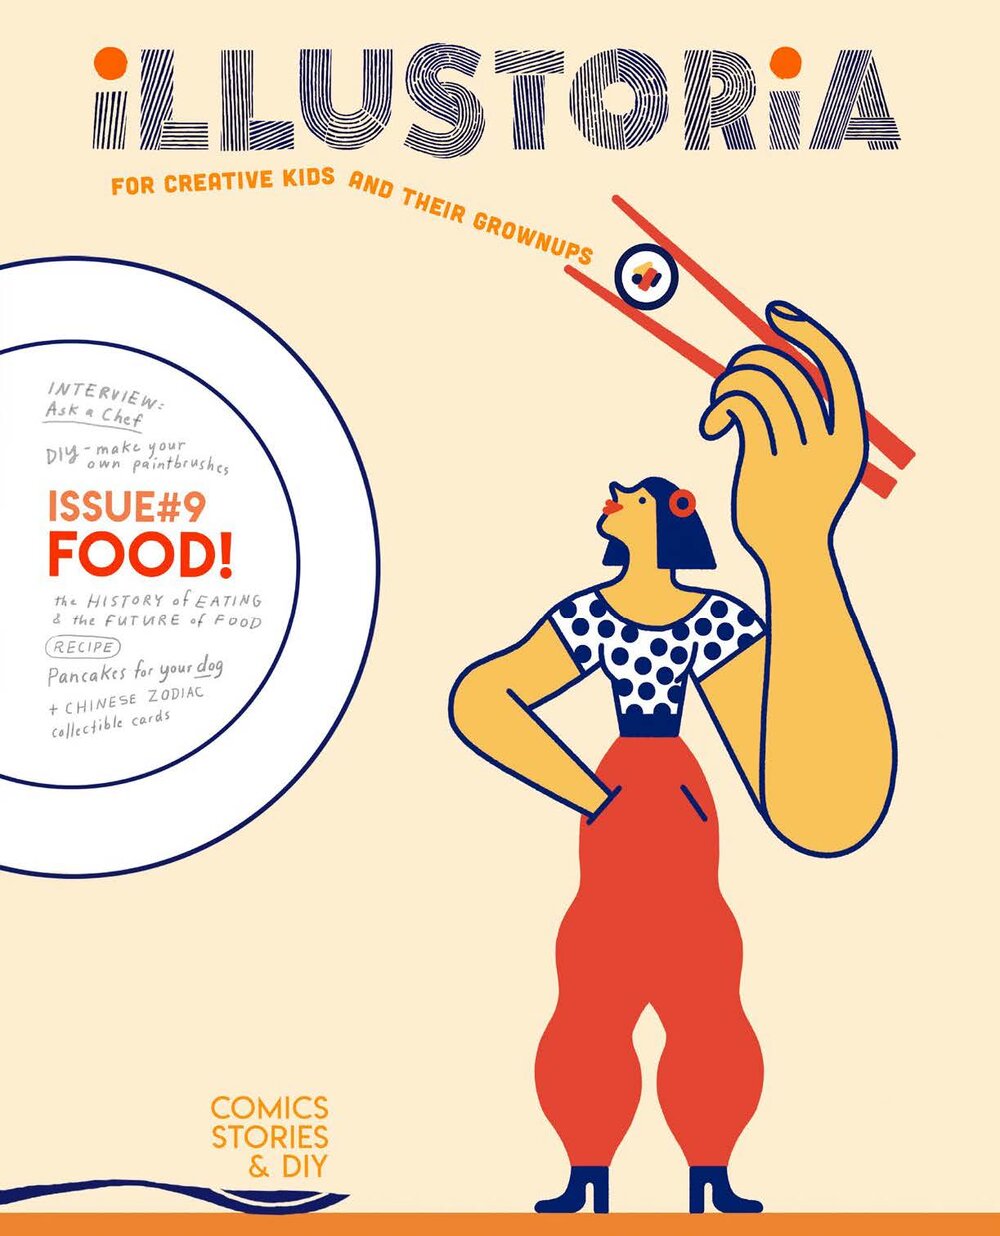 Illustoria: For Creative Kids and Their Grownups - The Food Issue